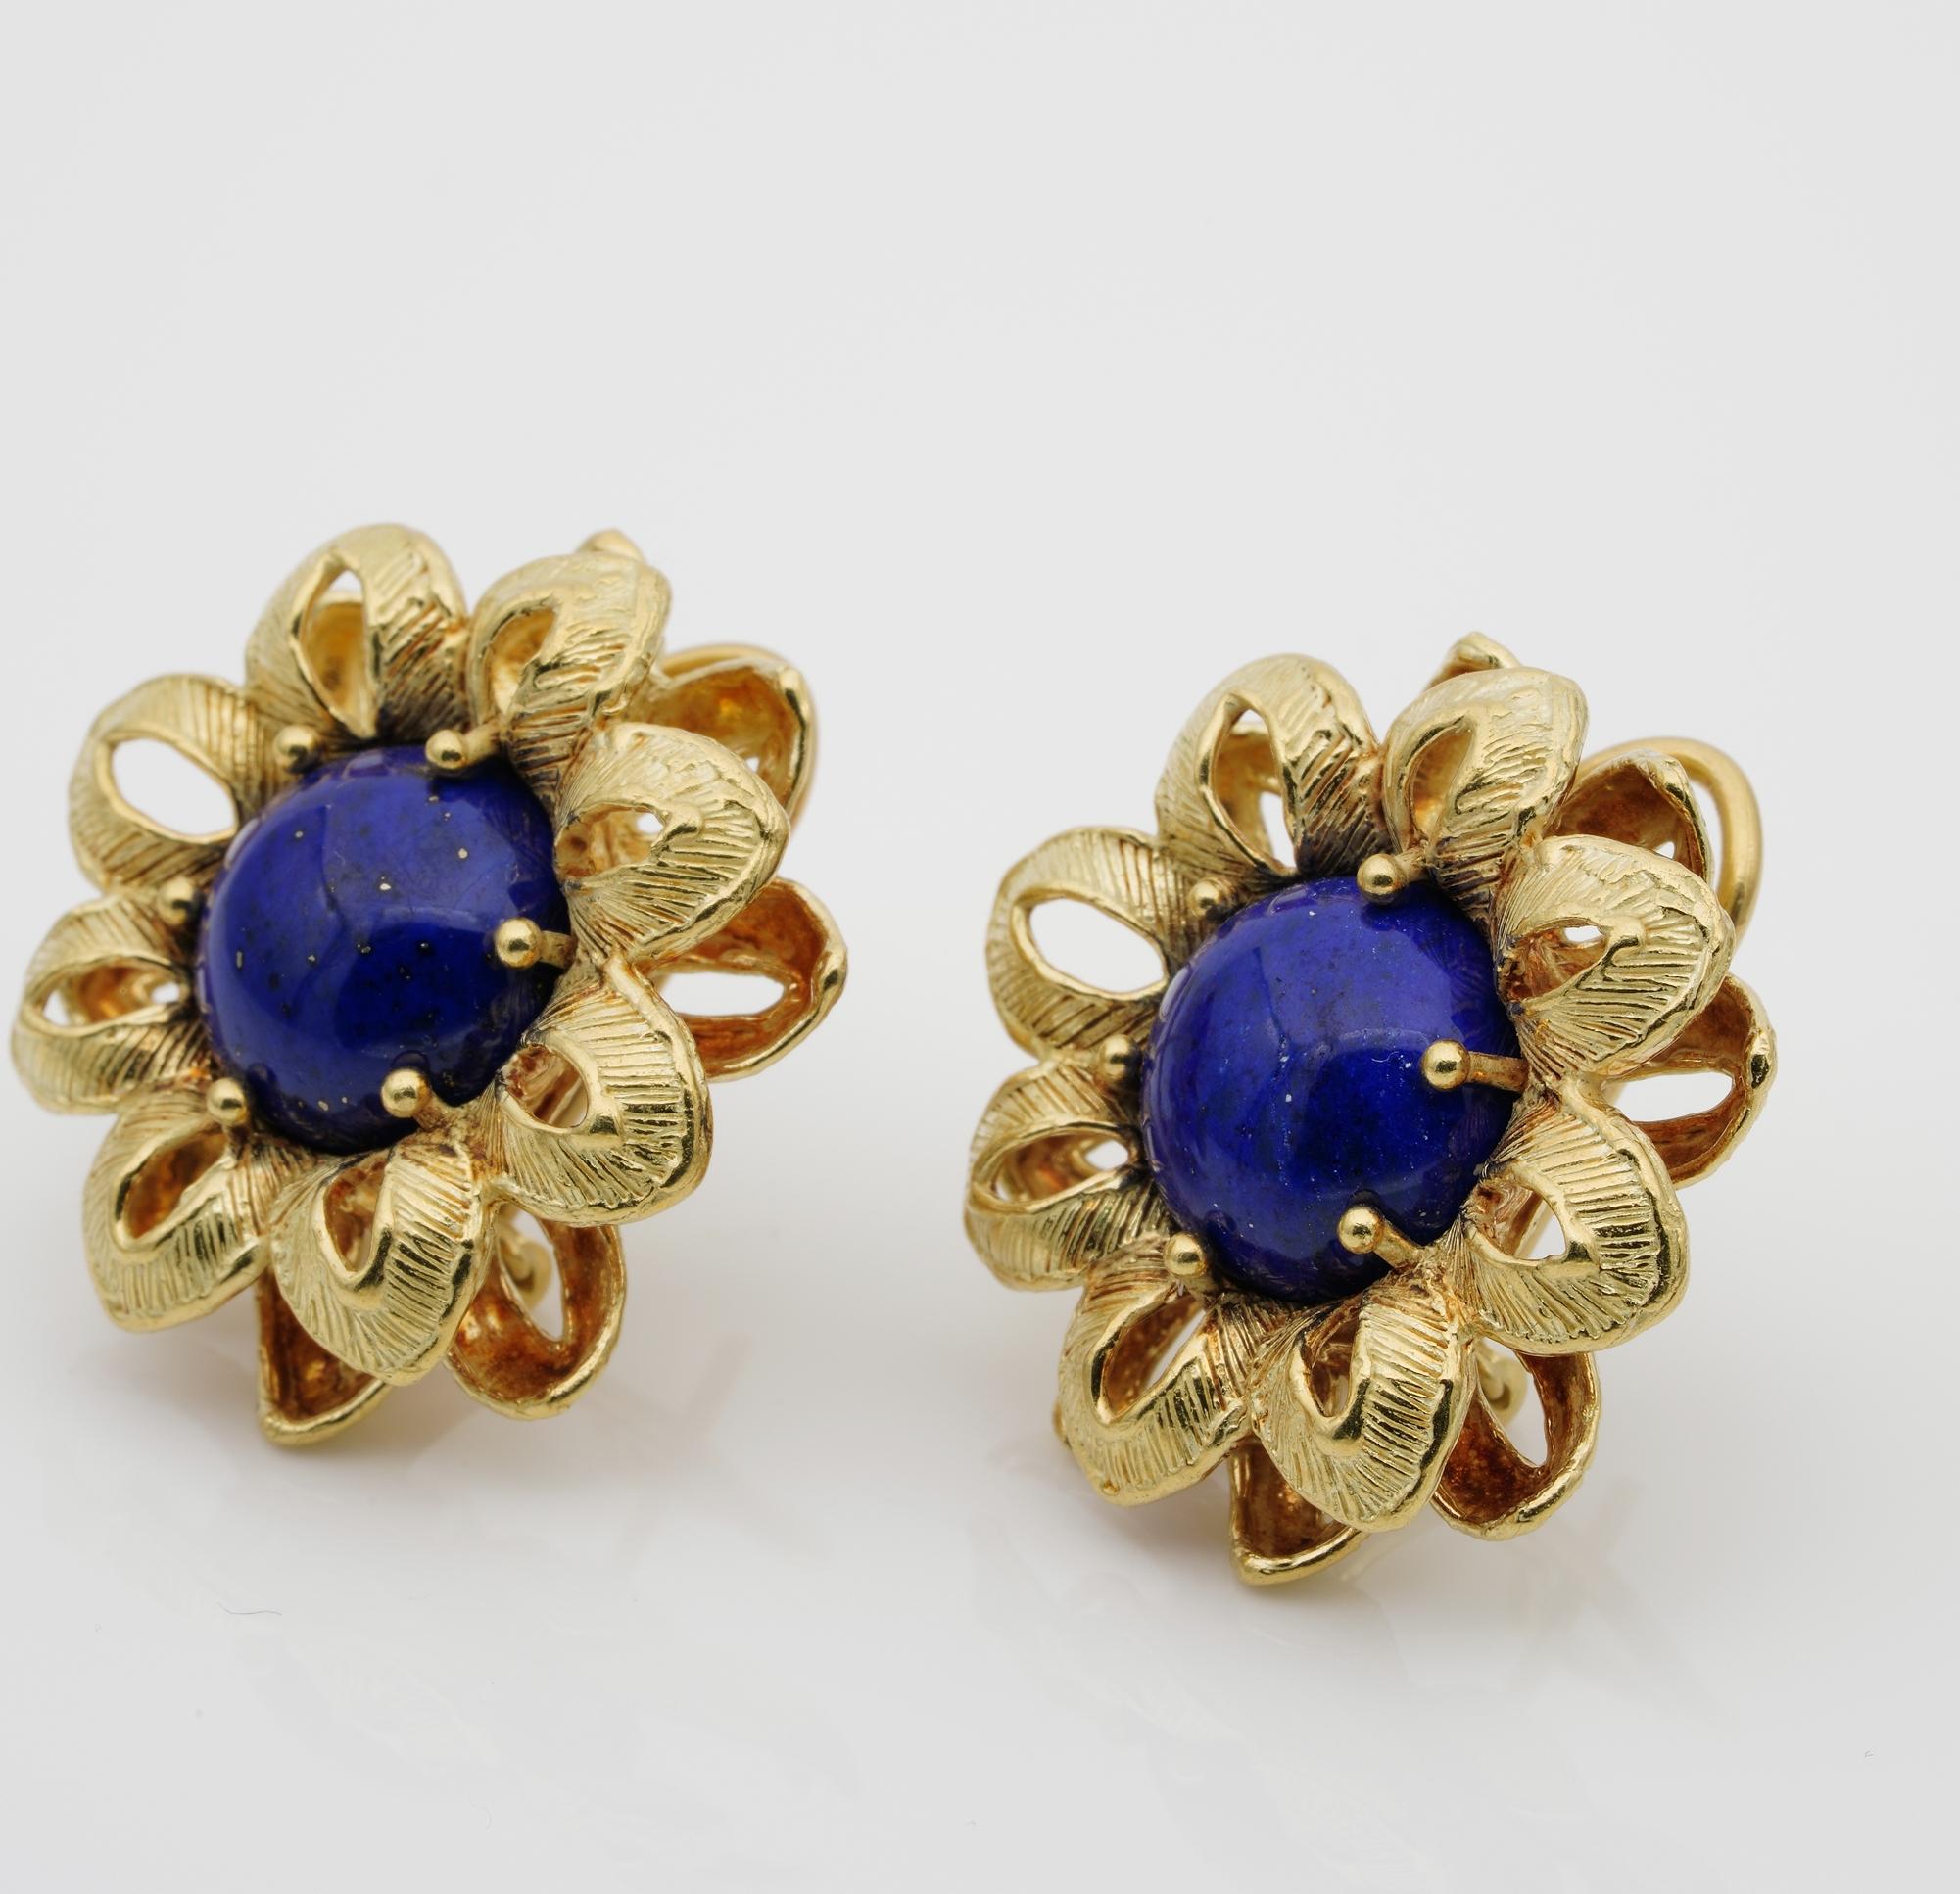 Contemporary Charming Vintage Lapis Large Flower Earring For Sale